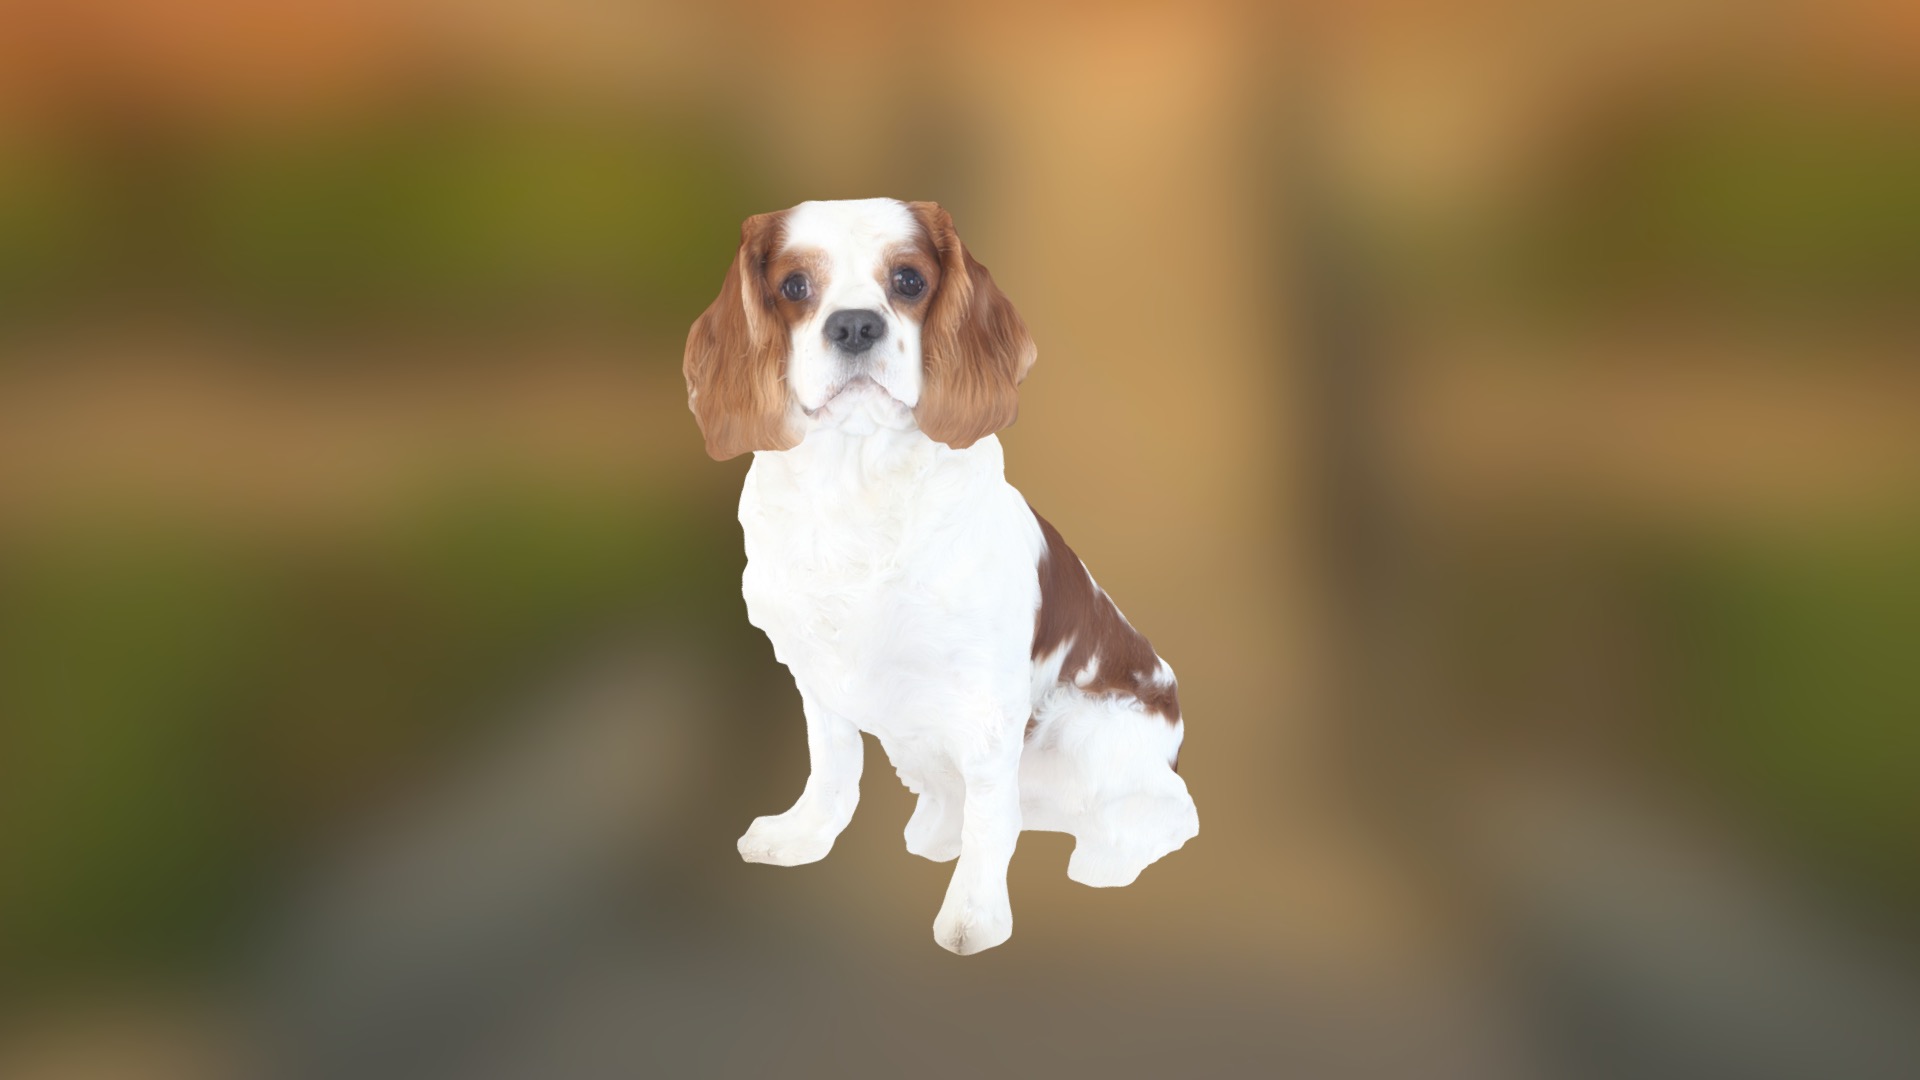 3D model Puppy - This is a 3D model of the Puppy. The 3D model is about a dog running in the grass.